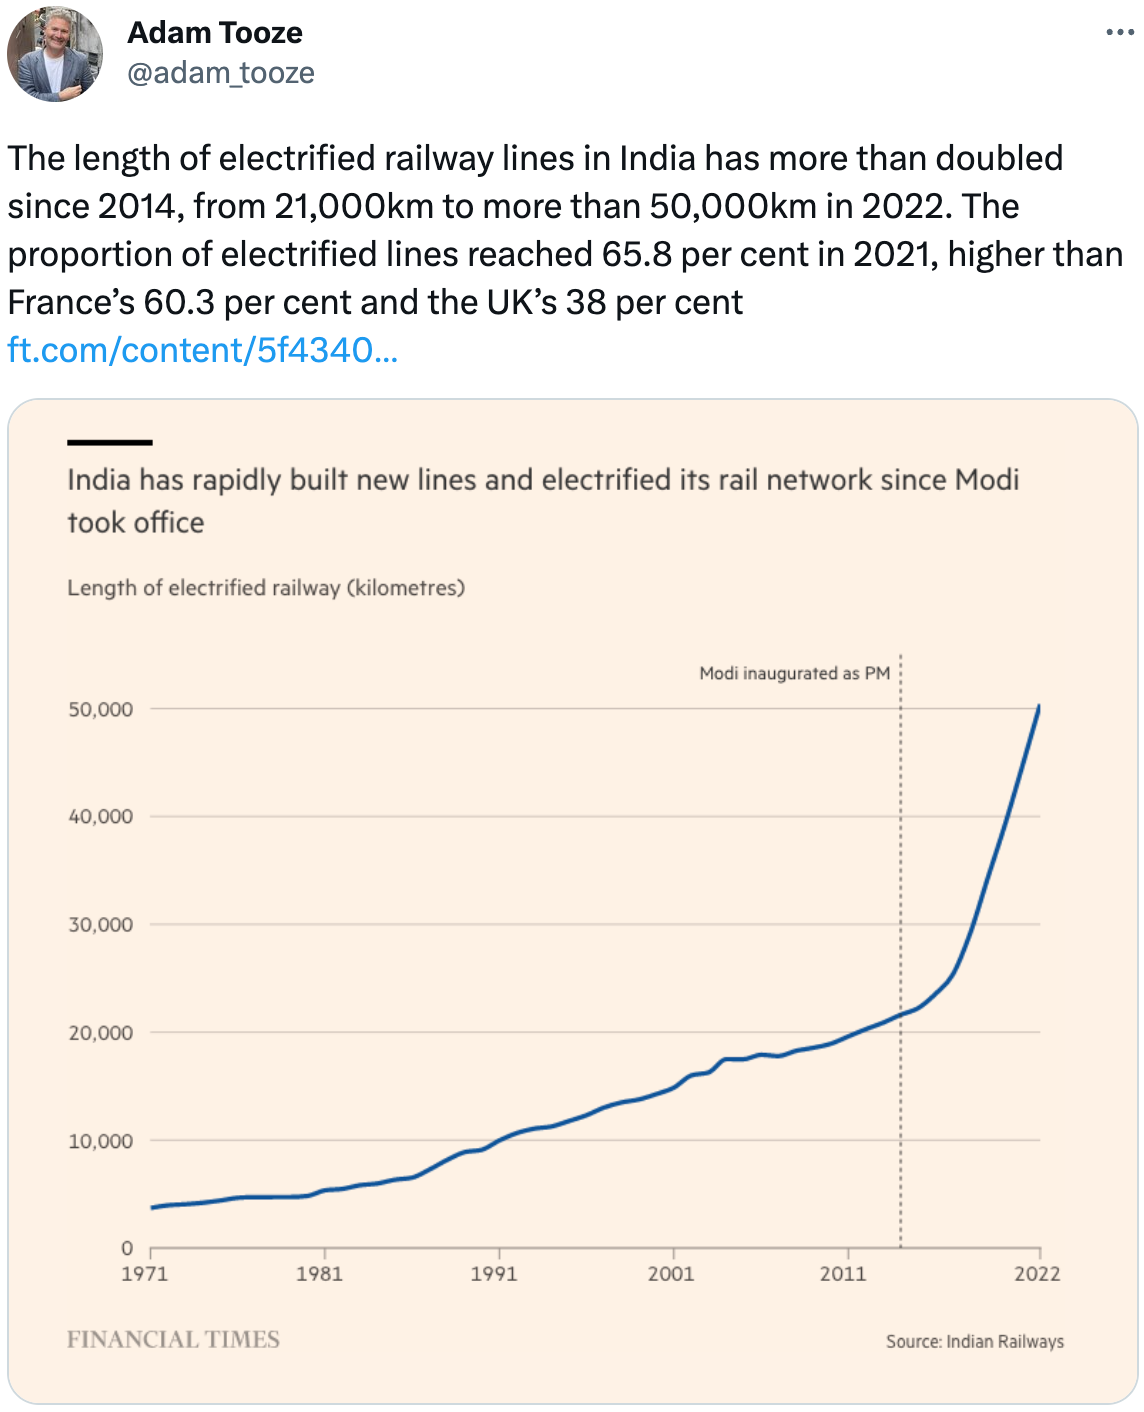  Adam Tooze @adam_tooze The length of electrified railway lines in India has more than doubled since 2014, from 21,000km to more than 50,000km in 2022. The proportion of electrified lines reached 65.8 per cent in 2021, higher than France’s 60.3 per cent and the UK’s 38 per cent https://ft.com/content/5f43408b-4a03-4745-a729-c3812c59ddbc